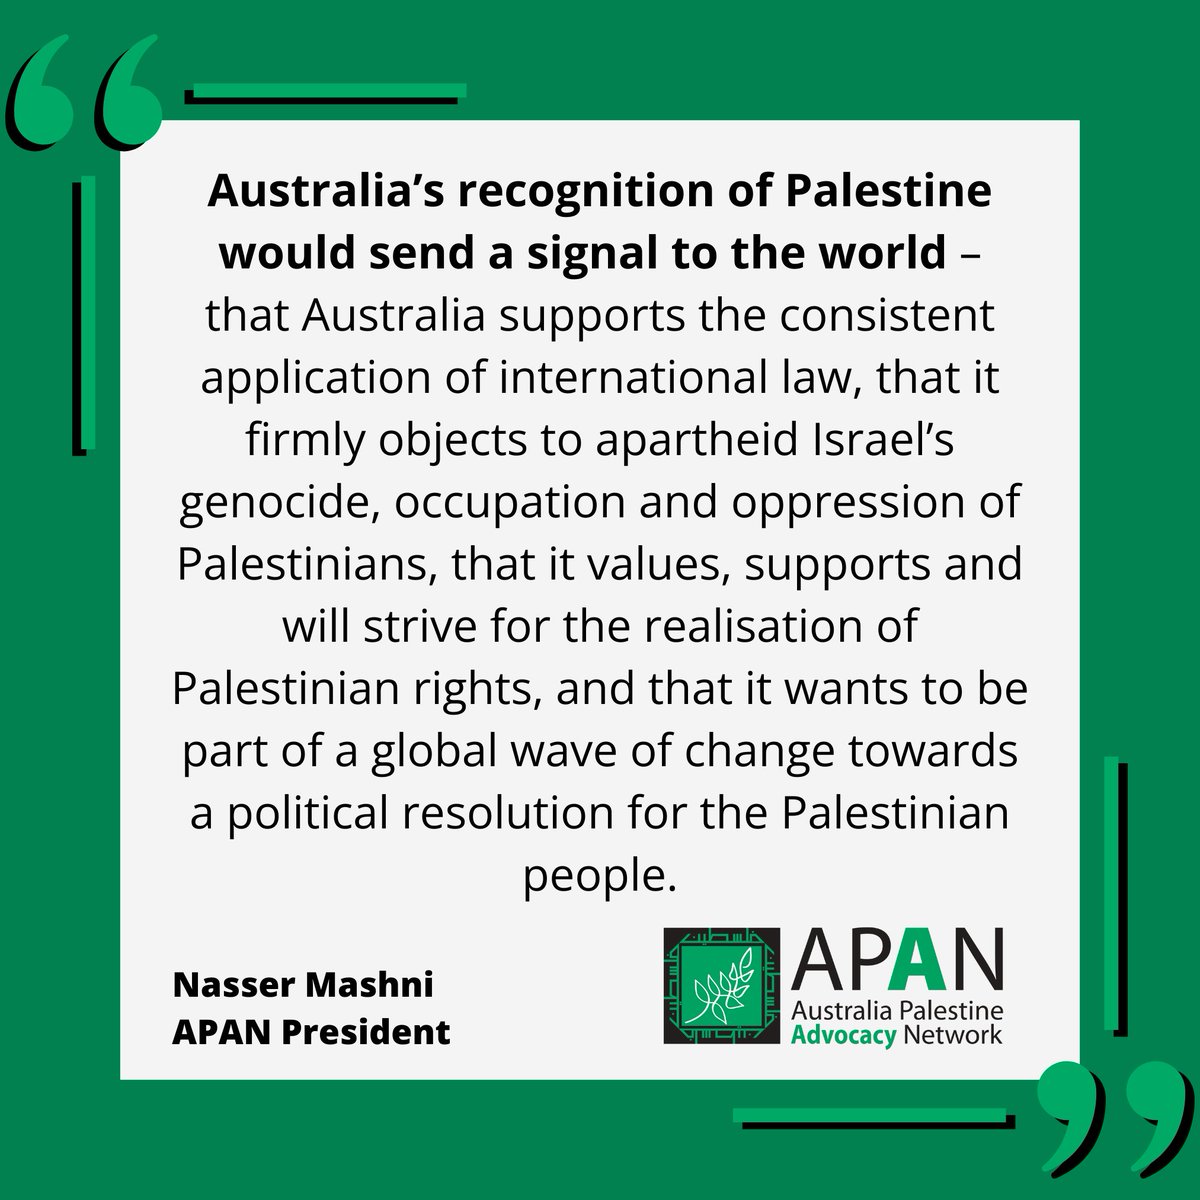 APAN welcomes the Foreign Minister’s support for the recognition of Palestine, but considers this only the first political step in supporting Palestinians to realise their rights to self-determination, justice and equality. apan.org.au/media_release/…